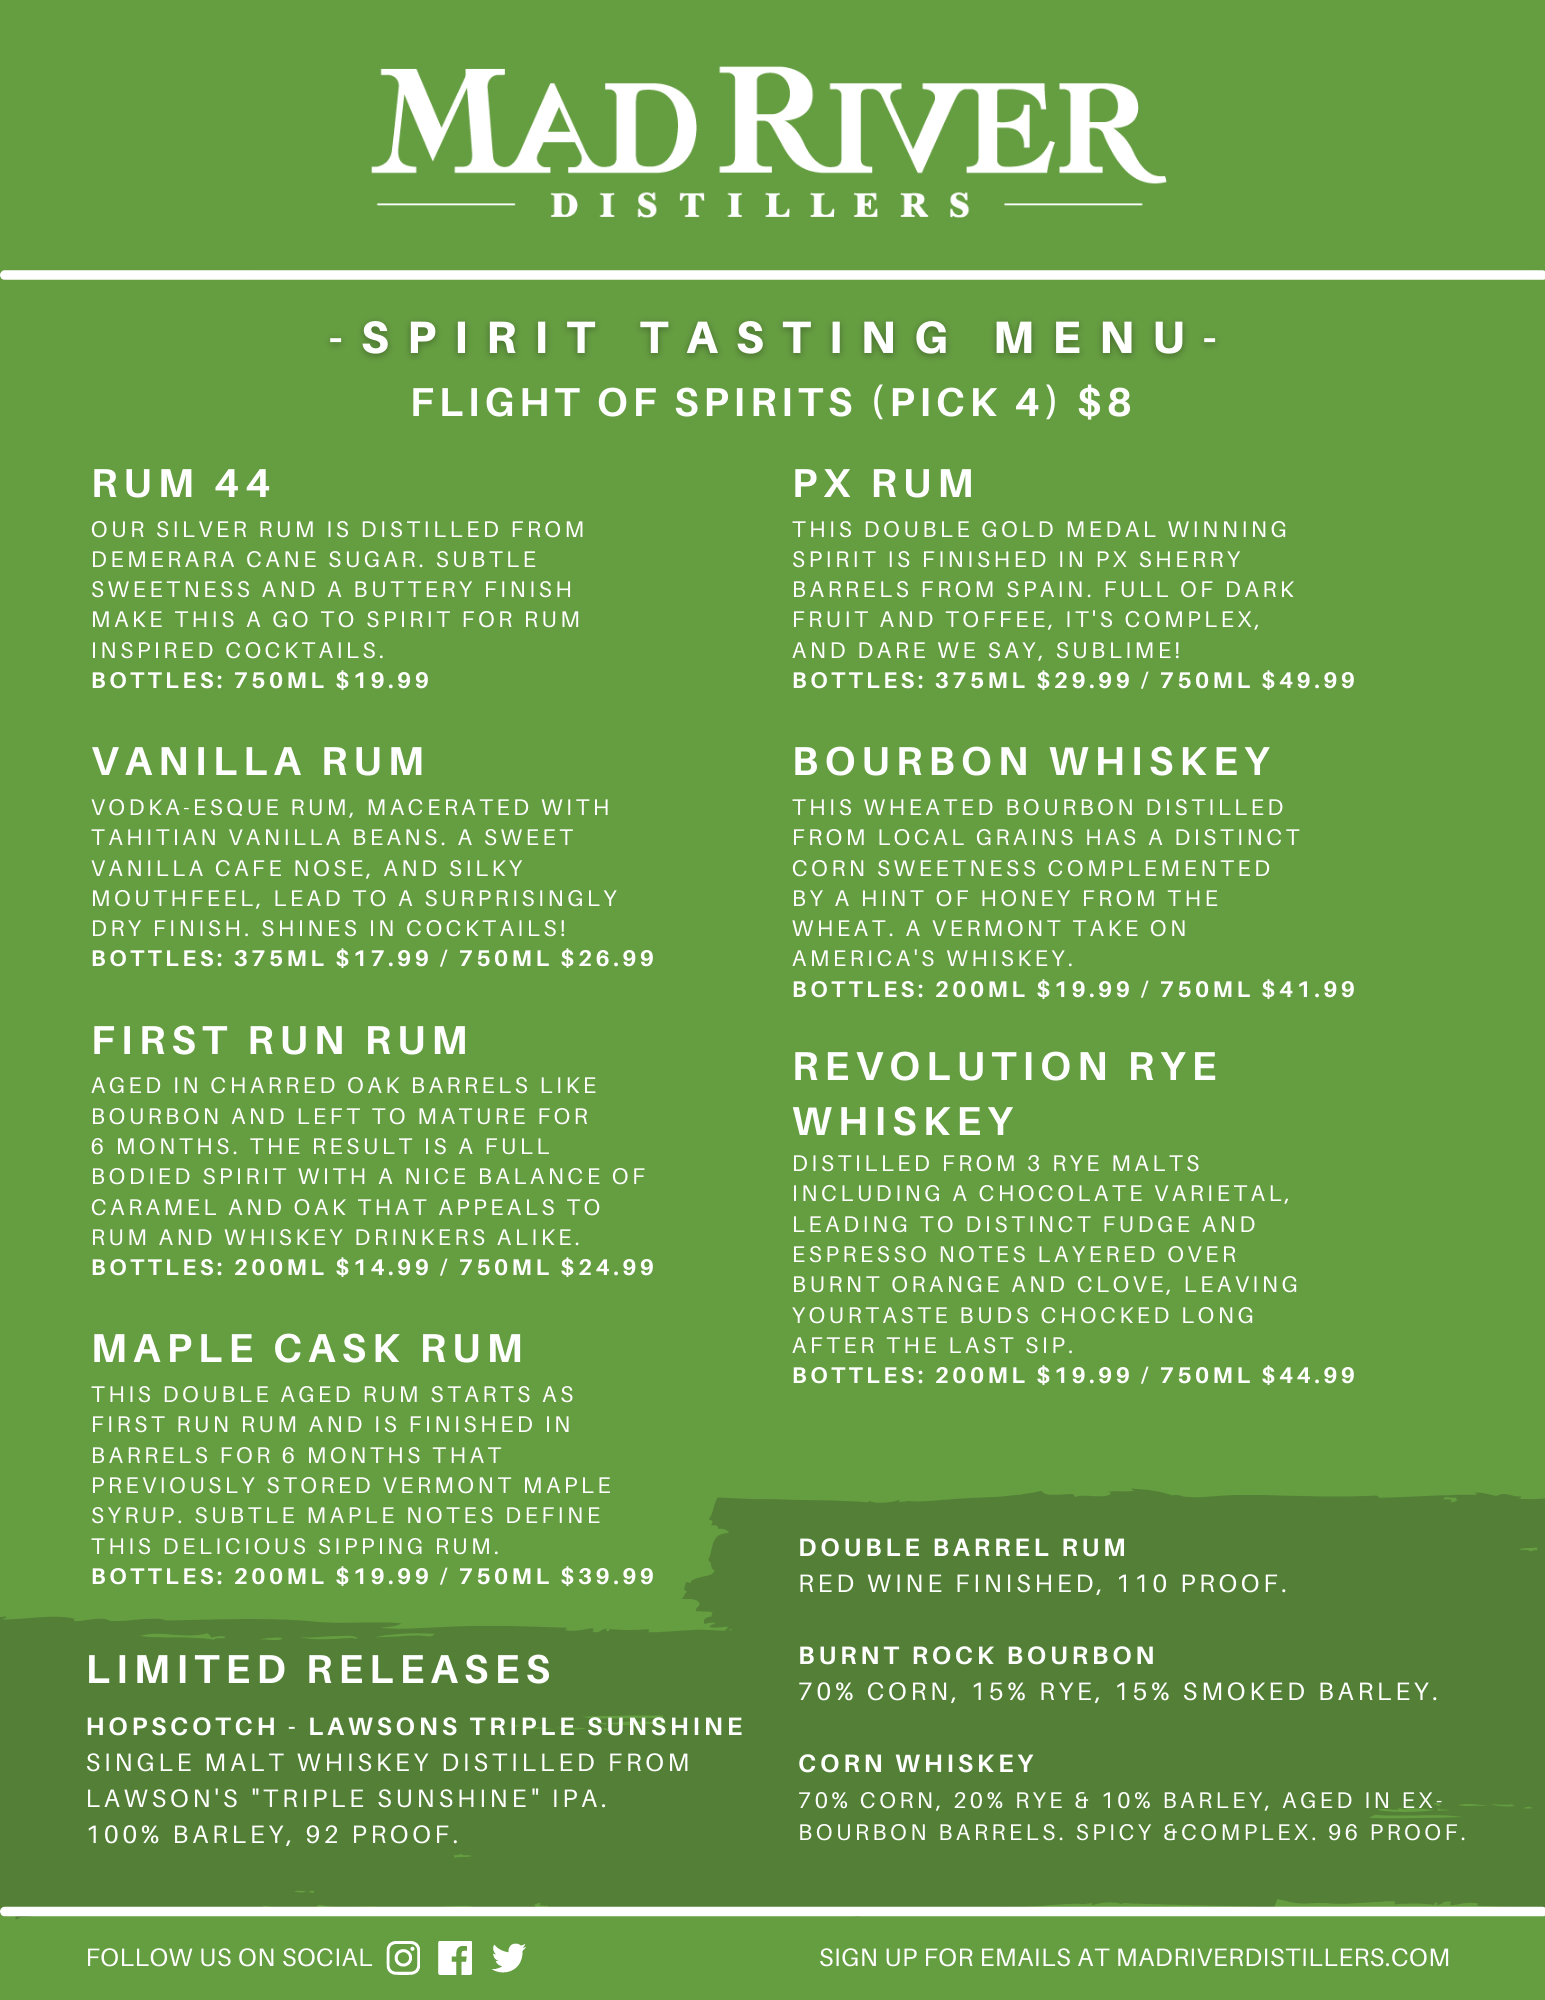 Spirit Tasting Menu: Rum 44, Vanilla Rum, First Run Rum, Maple Cask Rum, PX Rum, Bourbon Whiskey, Revolution Rye Whiskey. Flight of Spirits (pick 4) for $8. Ask about our limited releases: Hopscotch - Lawsons Finest, Burnt Rock Bourbon, Double Barrel Rum, Corn Whiskey.